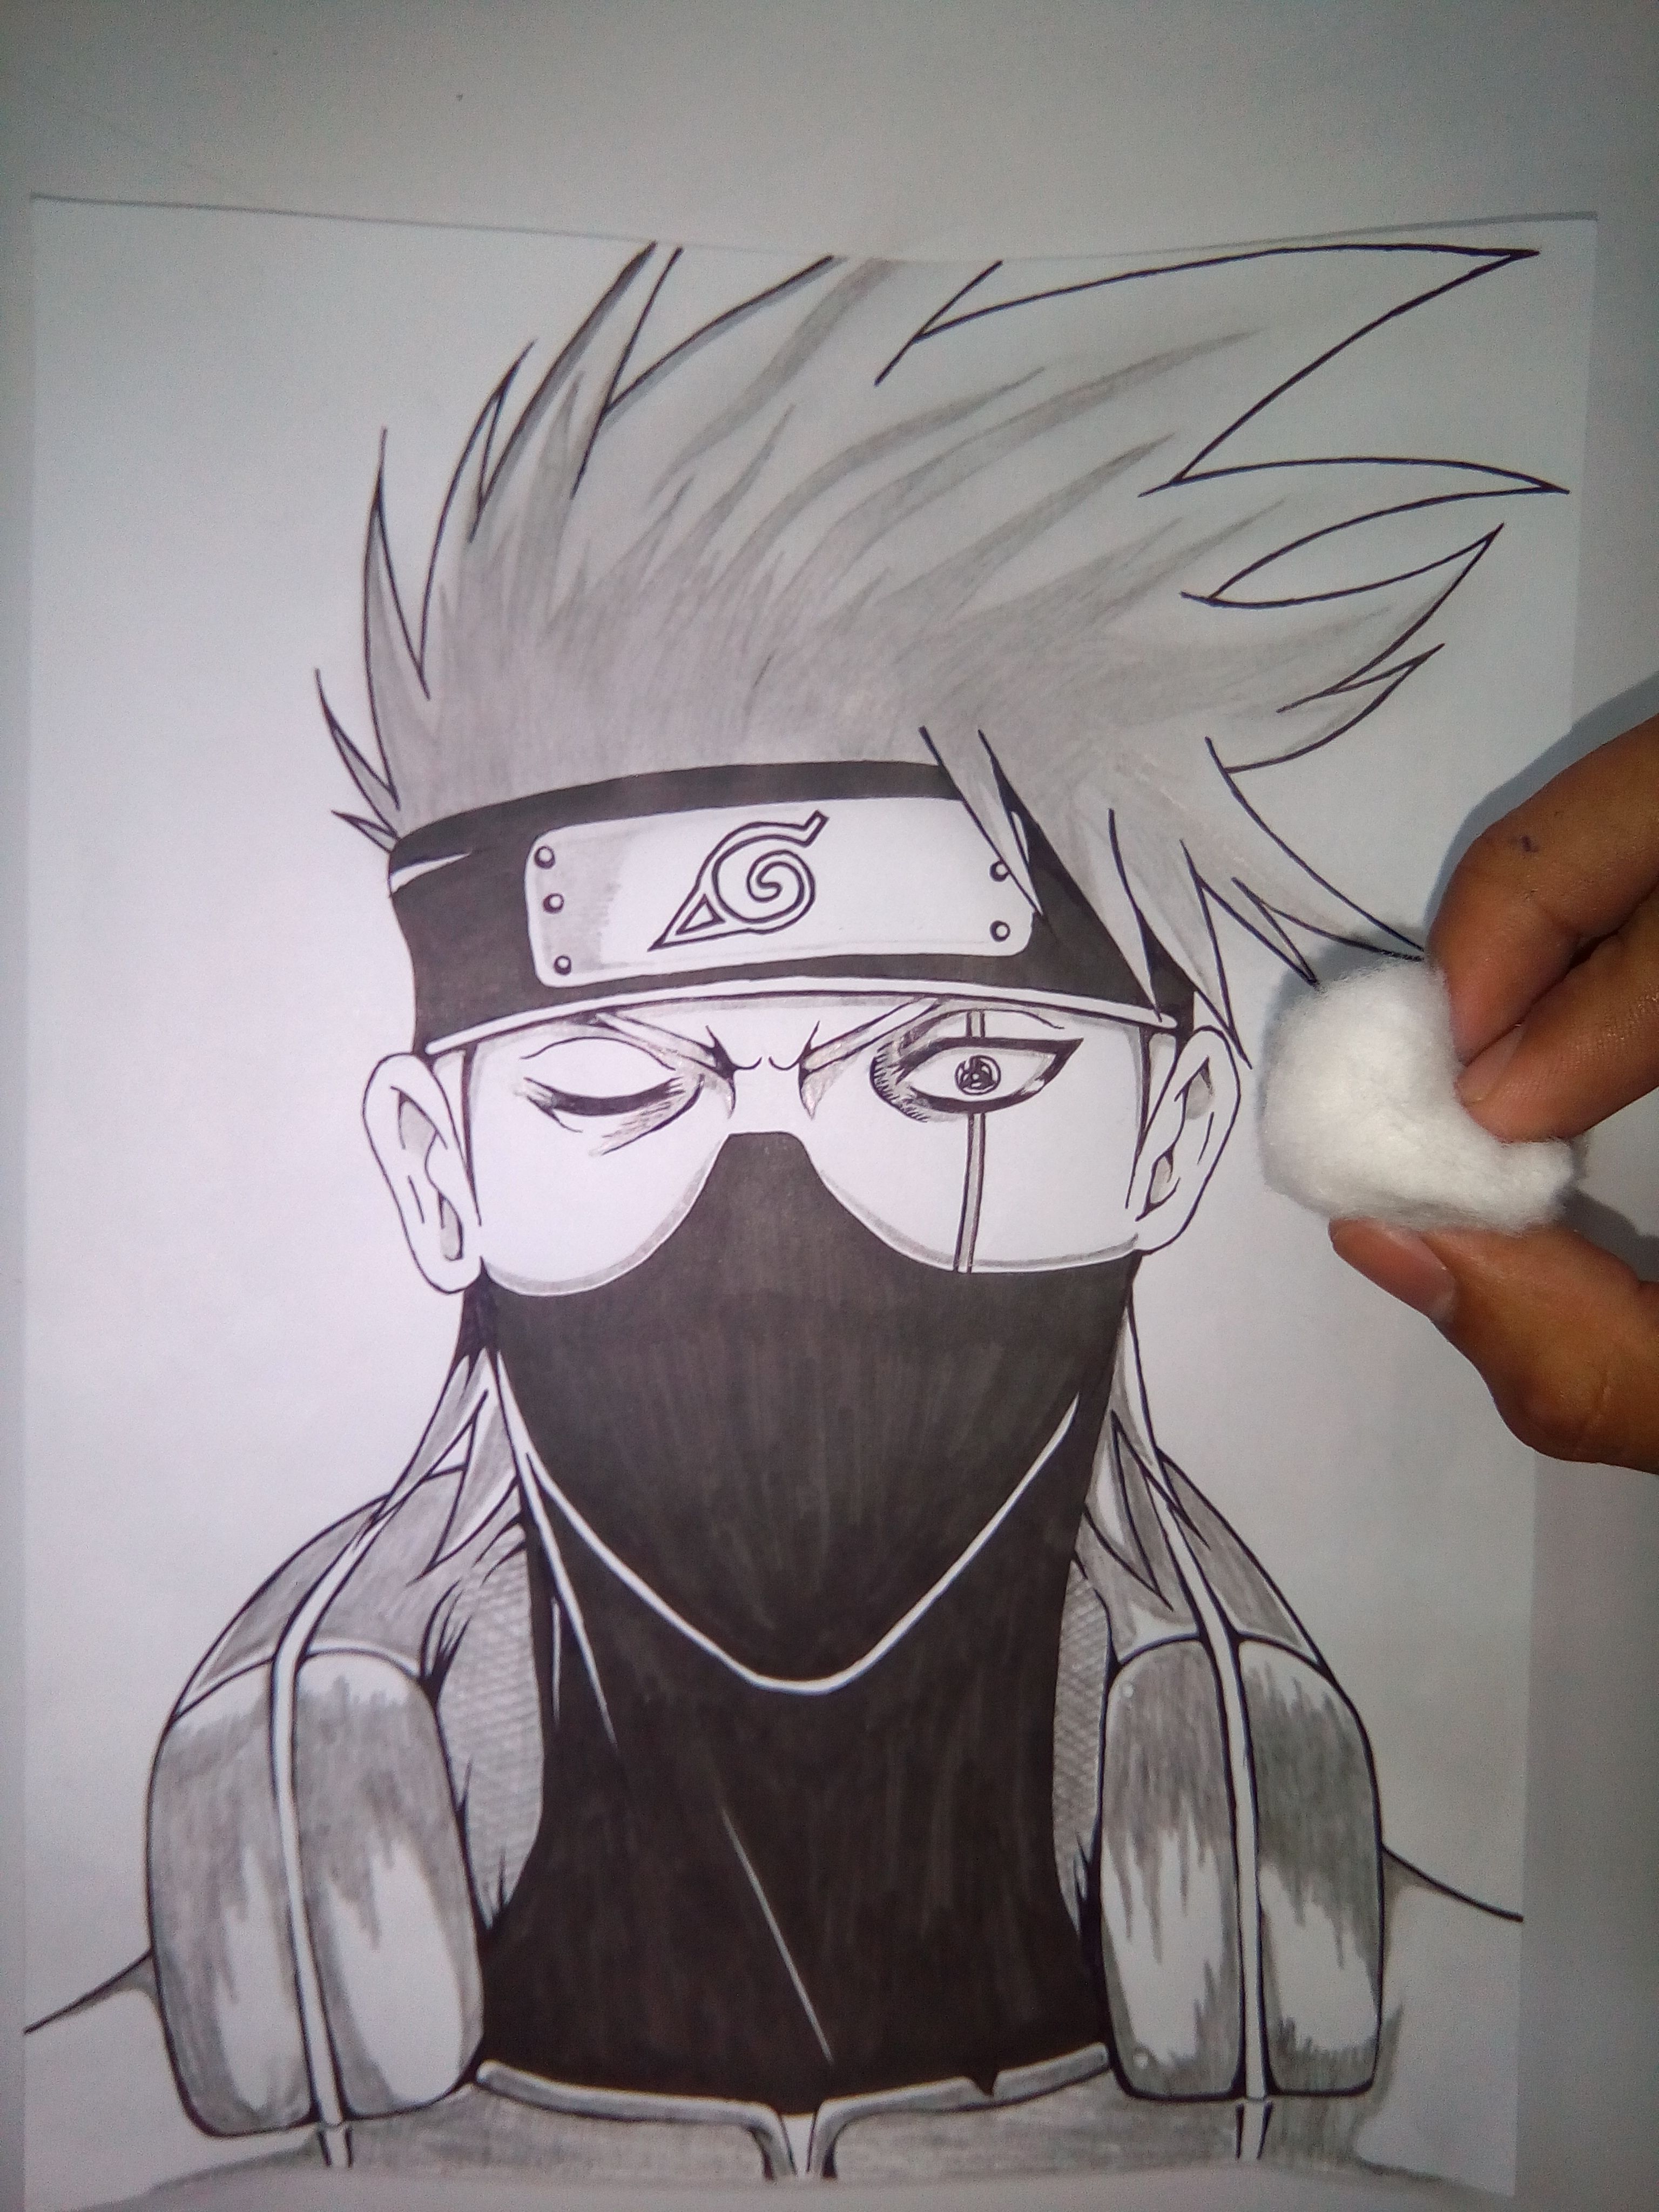 this is my pencil sketch of kakashi hatake and i am 13 years old so what  are ur thoughts on this ( i did a pencil sketch as i promised in my